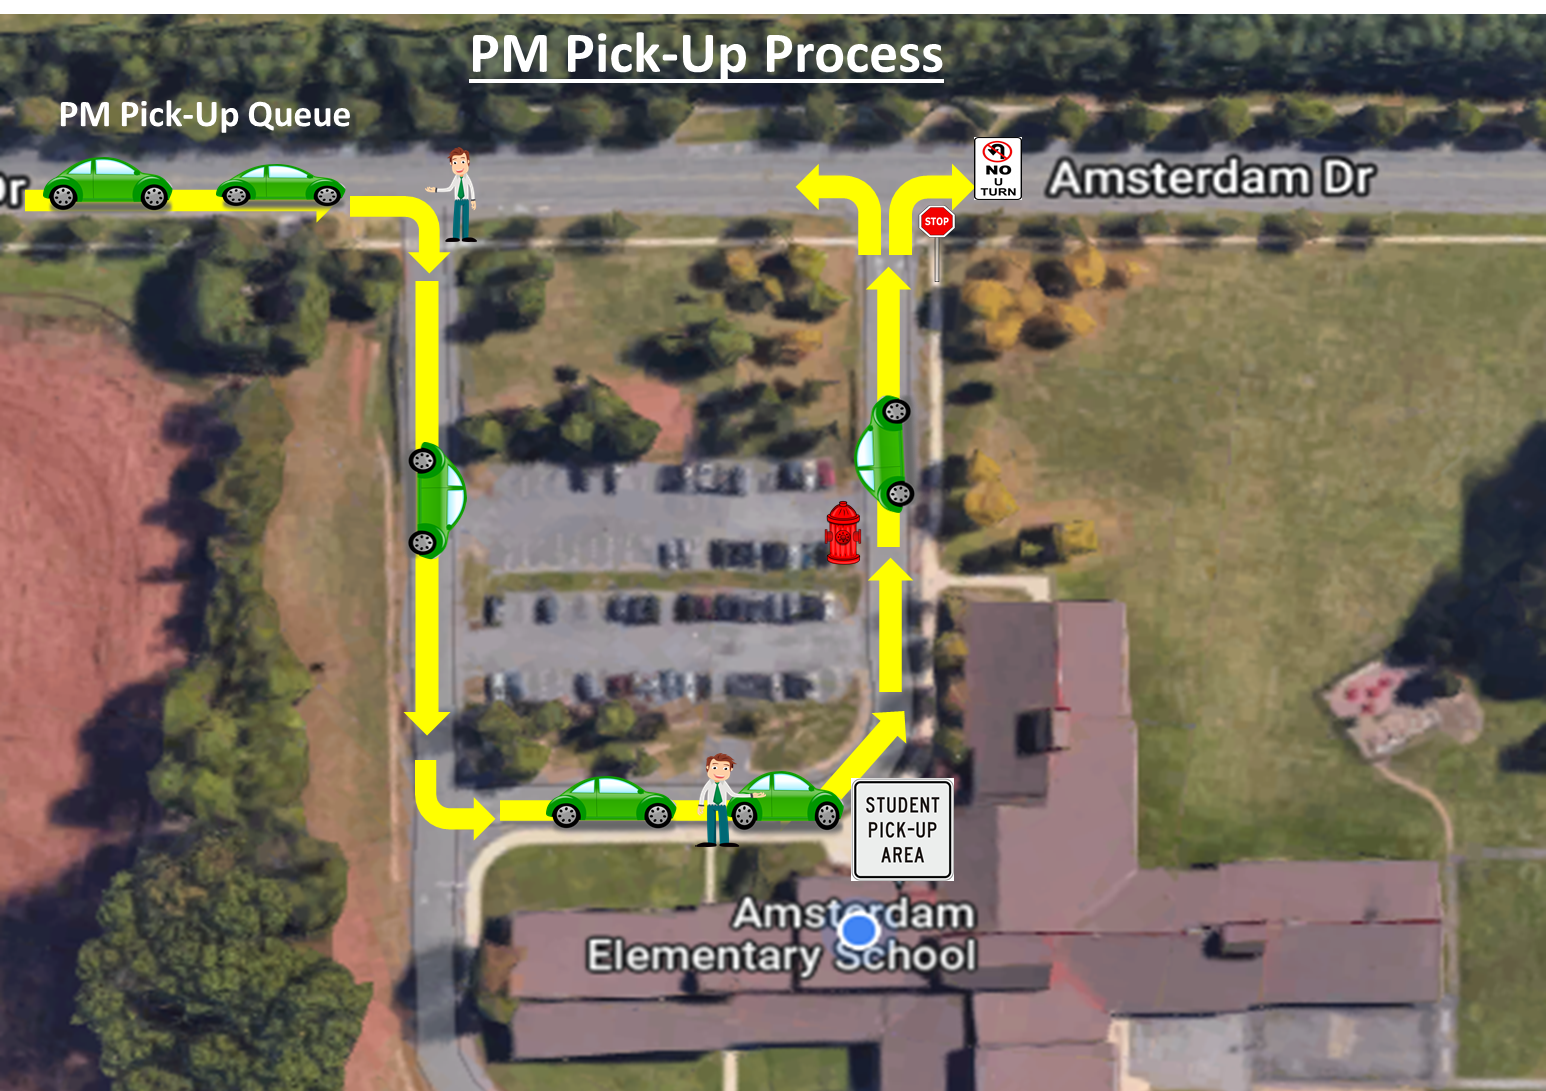 pm pickup process of images of cars and arrow going trhough parking lot of school